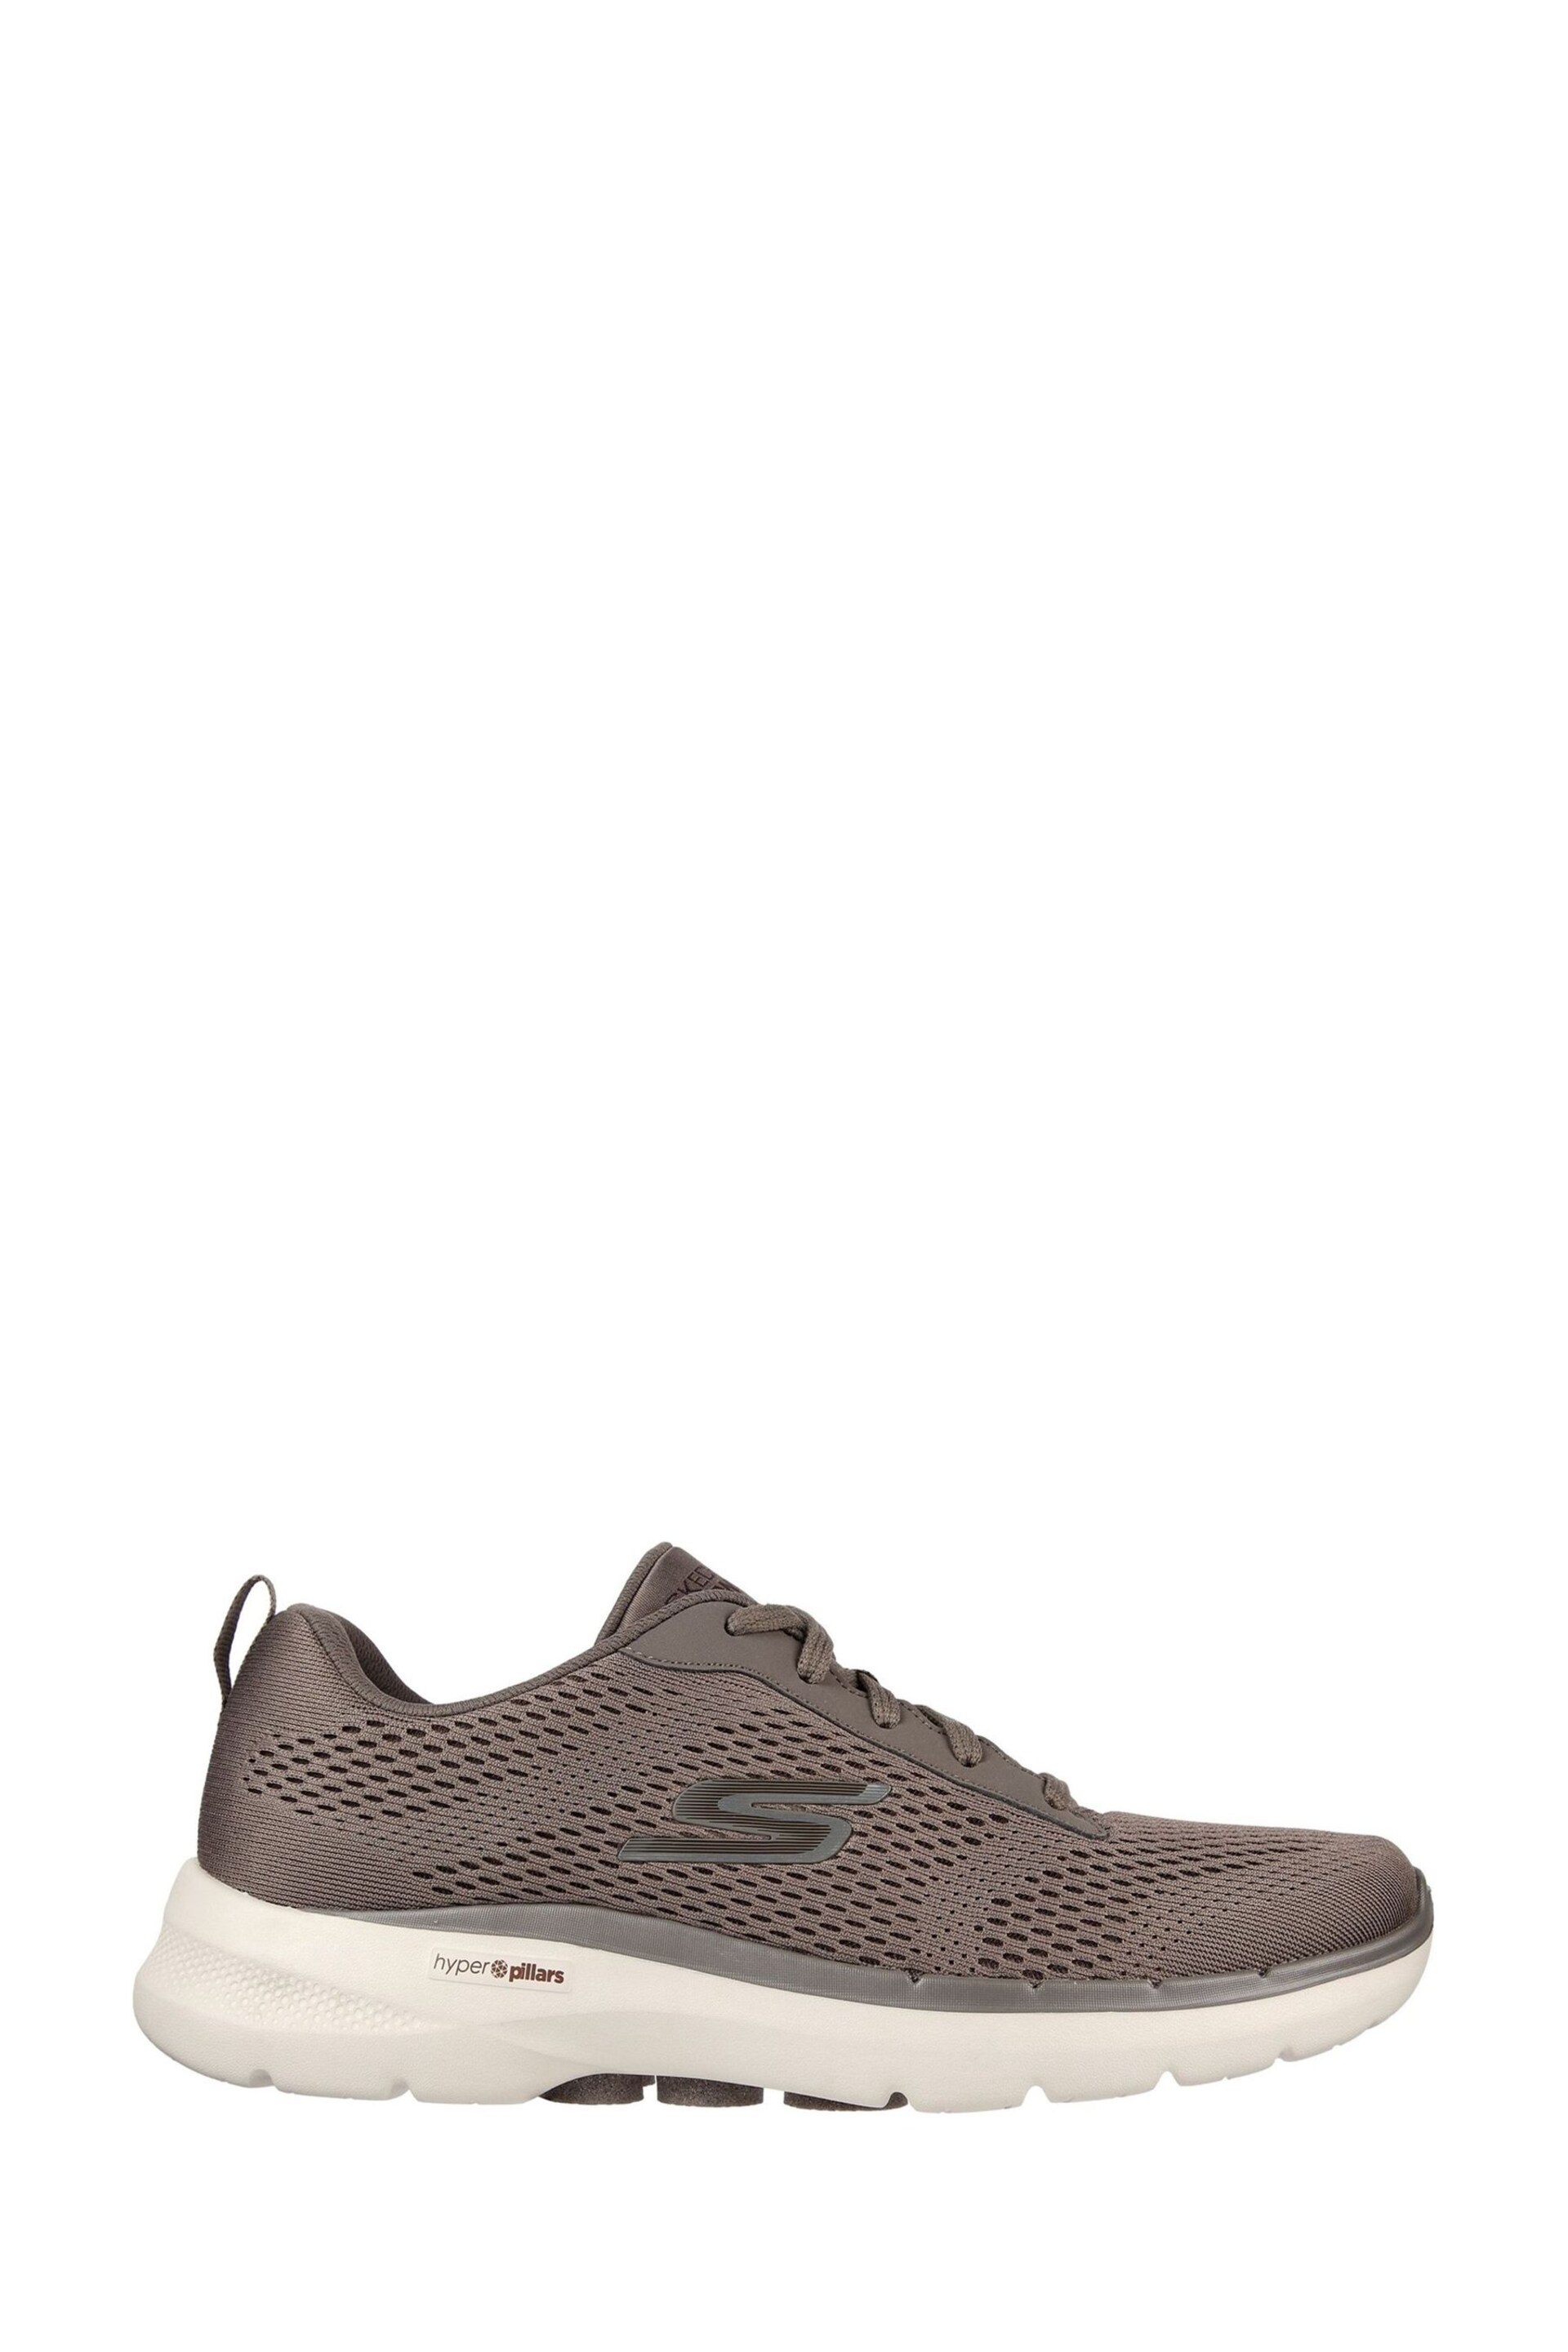 Skechers Brown Go Walk Avalo Mens Trainers - Image 1 of 3